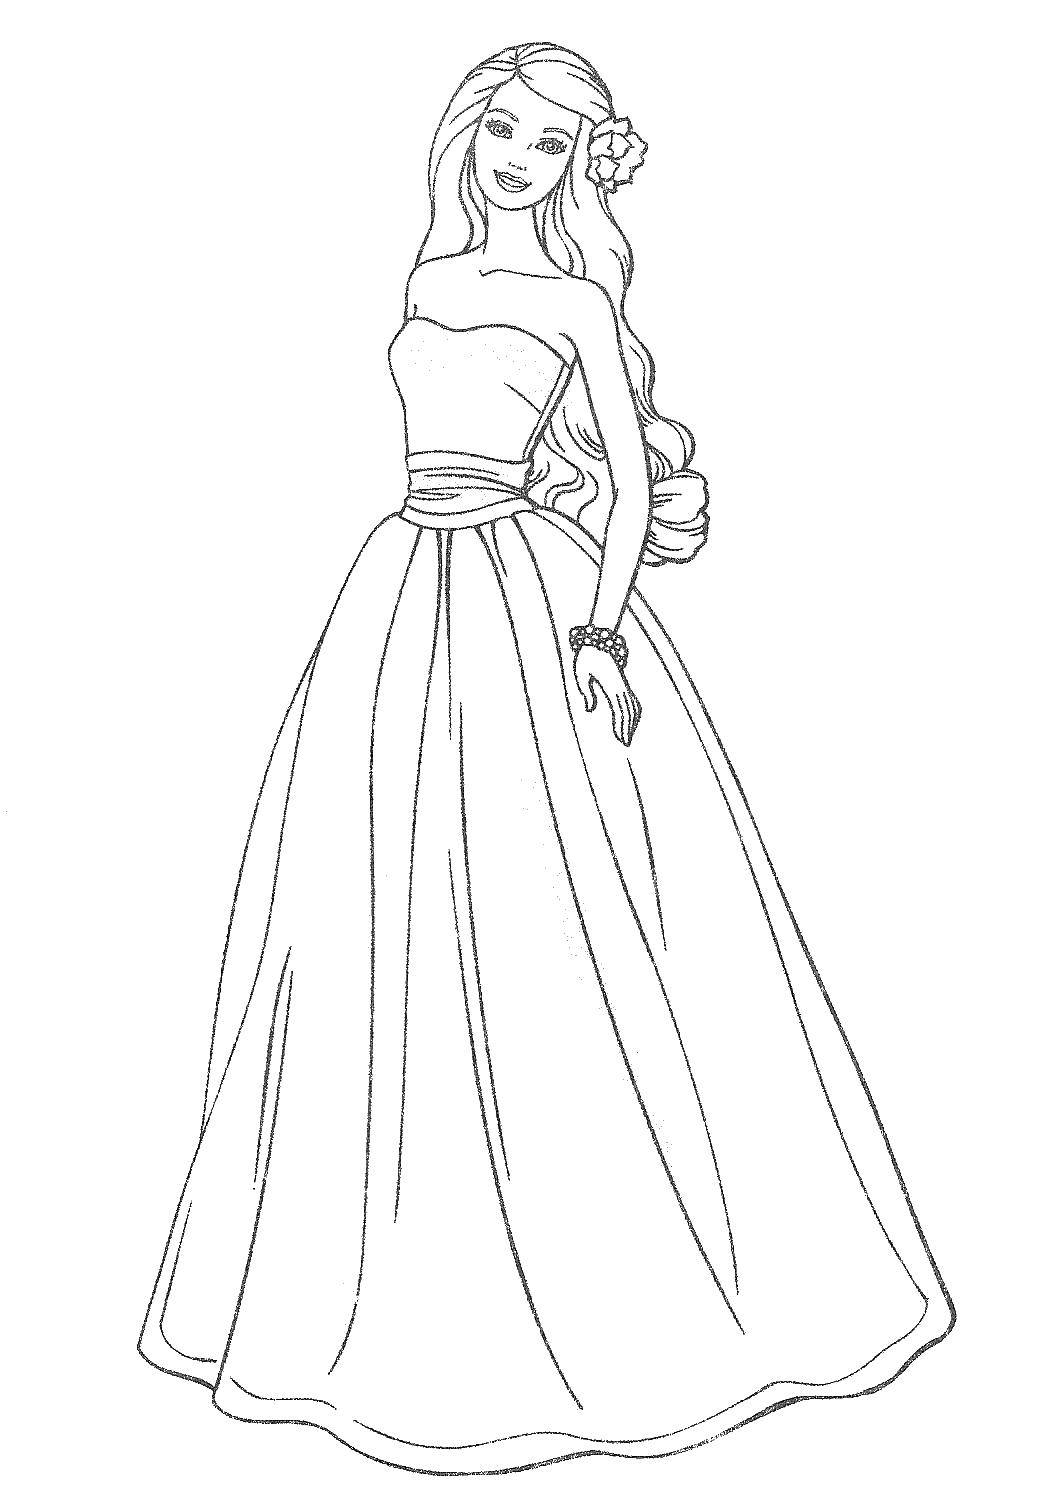 Coloring Guys in evening dress. Category Barbie . Tags:  Barbie dresses for girls.